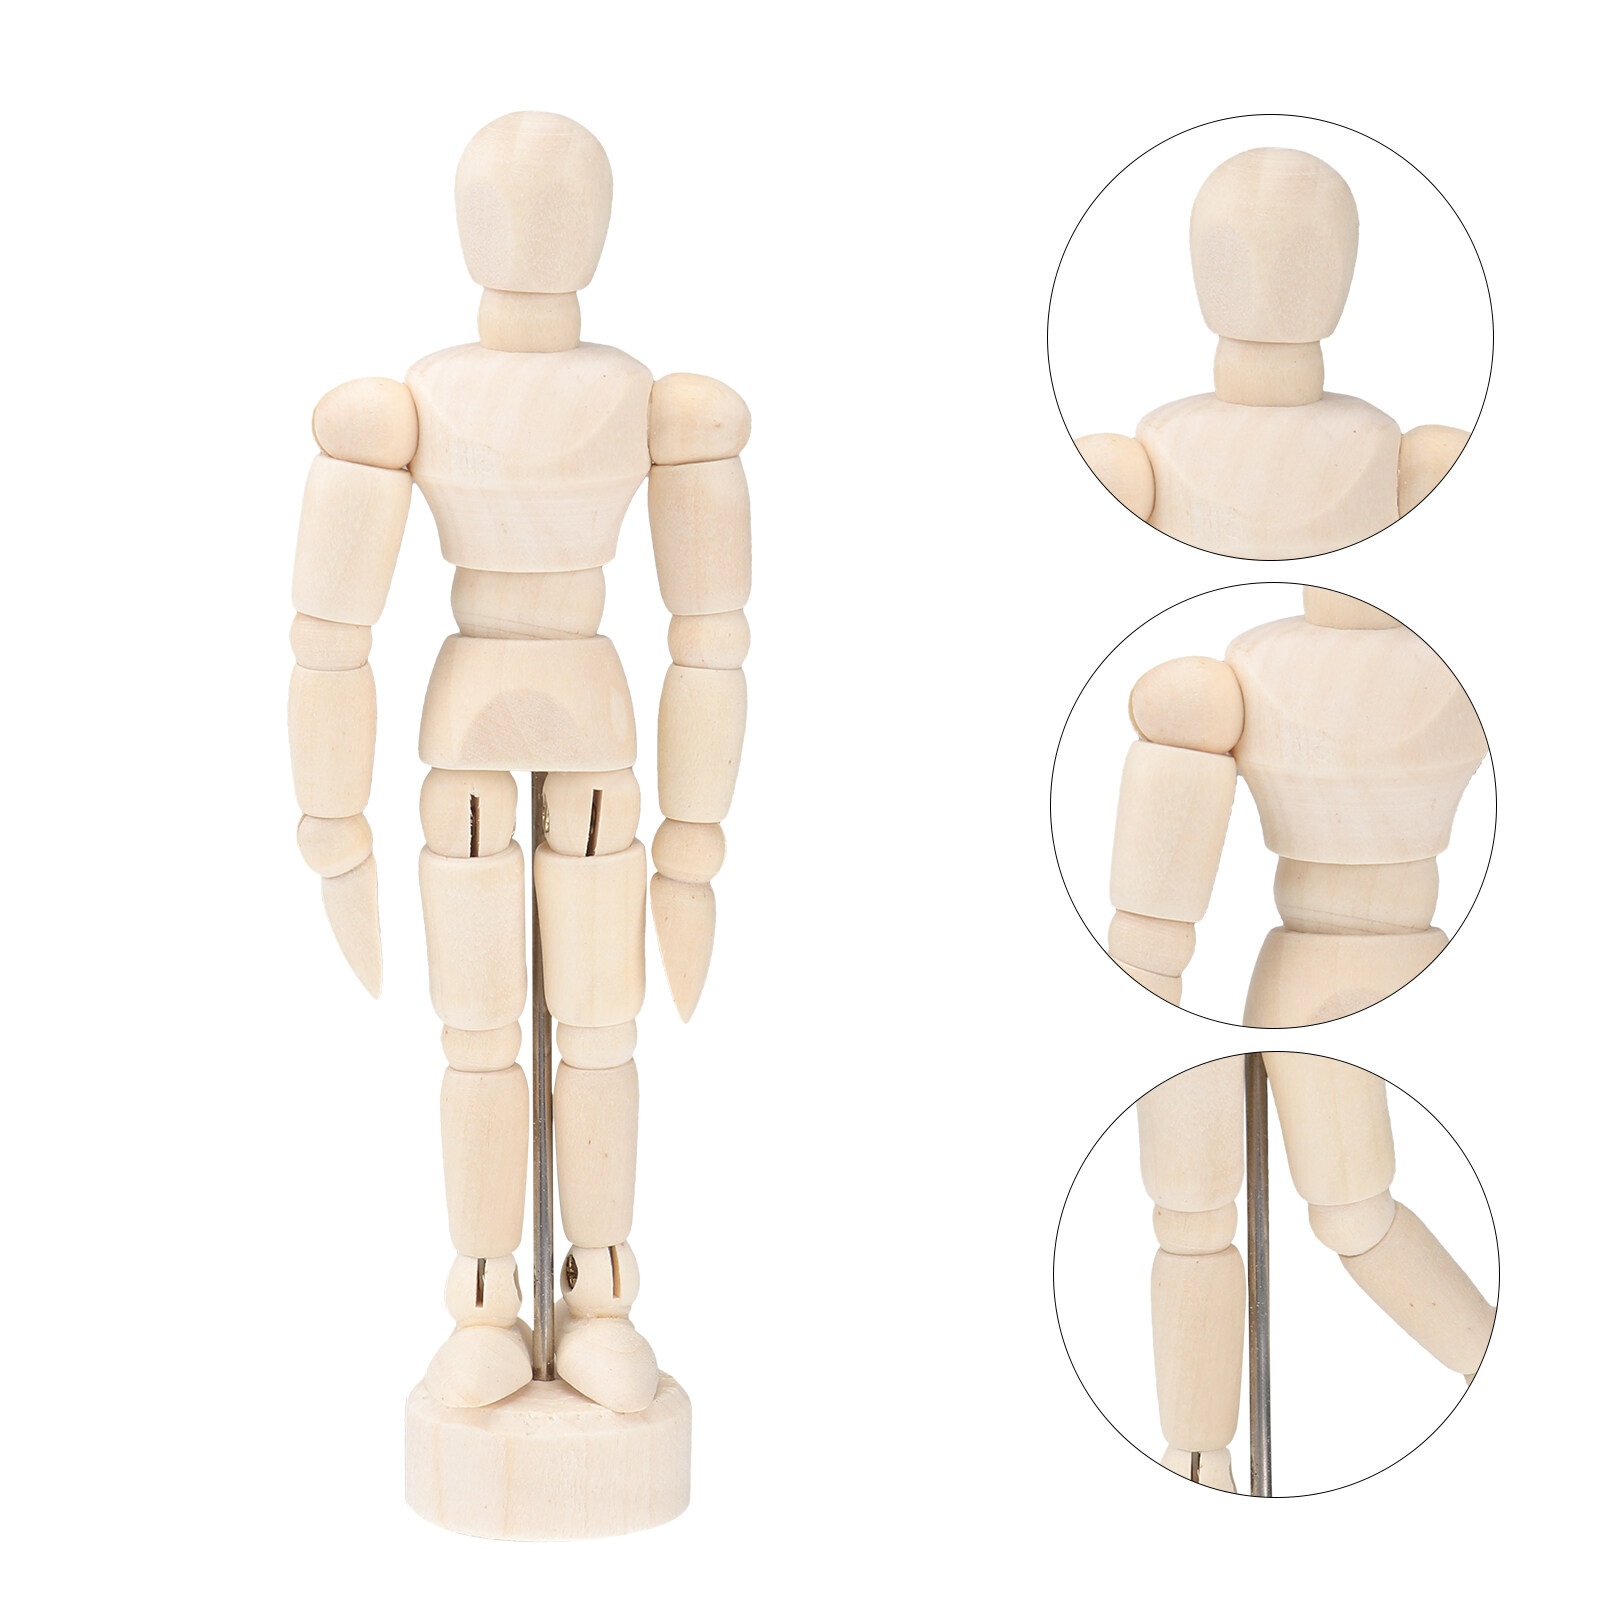 3pcs 4.5inches Wooden Figure Model Human Art Mannequin Jointed Manikins for Artists Sketch Home Office Desk Decoration (Beige), Adult Unisex, Size